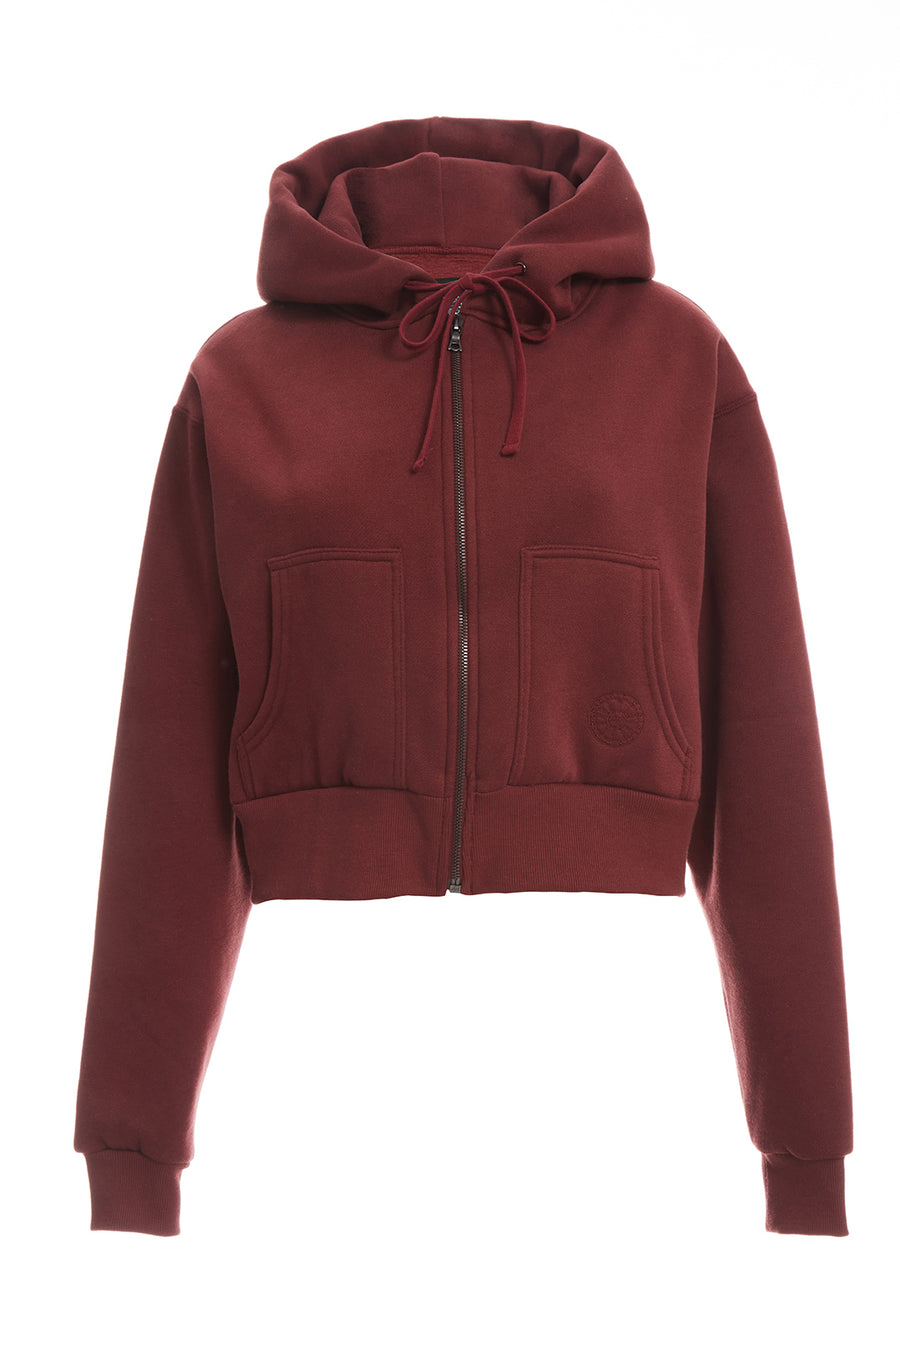 Hoodie Red Butterfly Sparkle